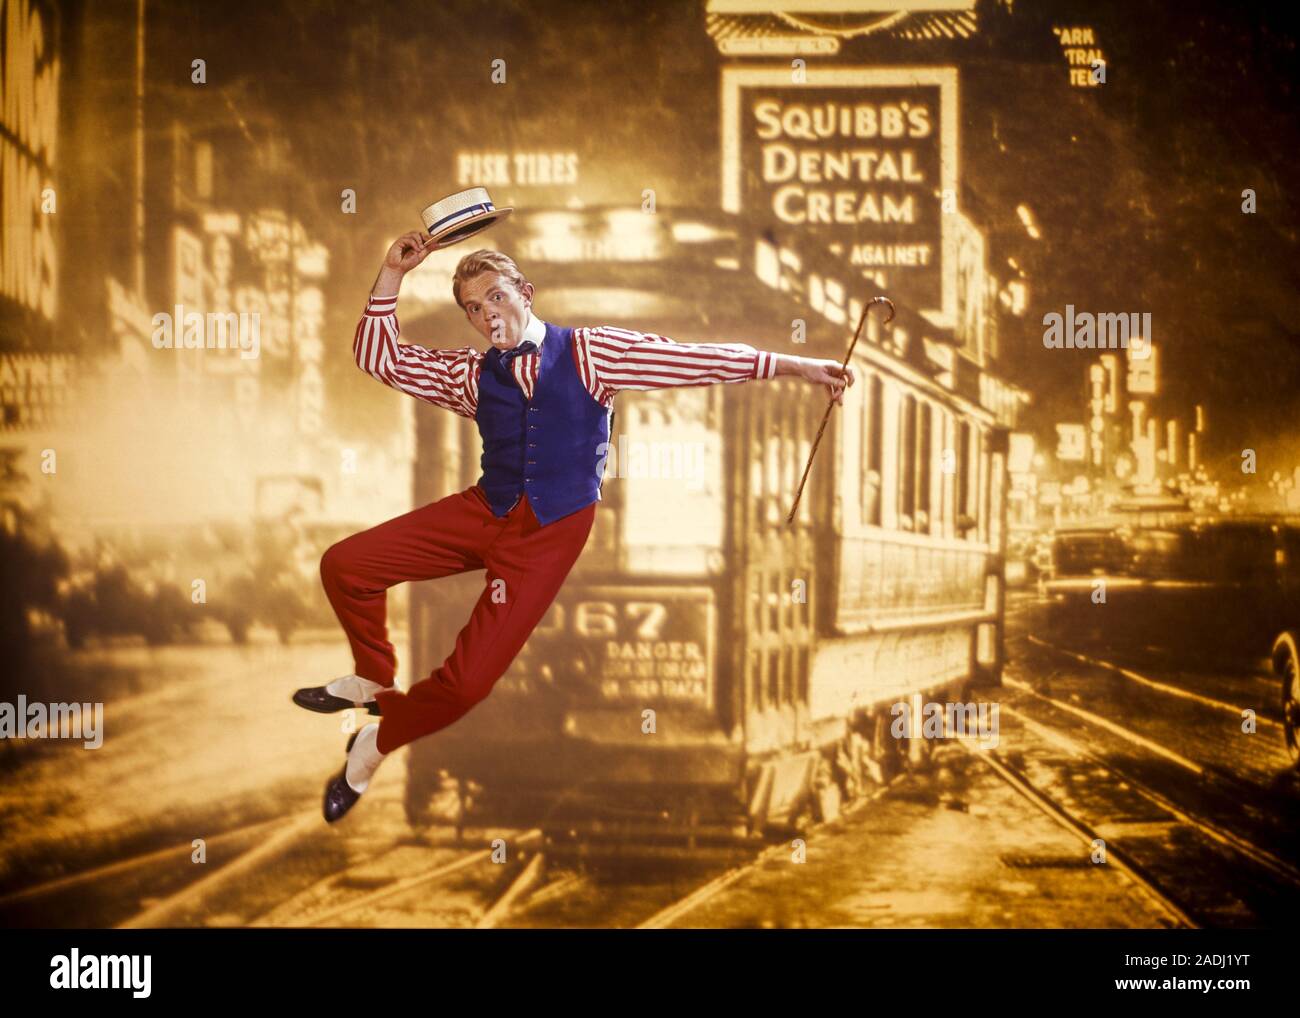 1970s VAUDEVILLE ERA TAP DANCING MAN JUMPING UP AND CLICKING HIS HEELS TOGETHER WITH SEPIA TONED 1920s SCENE OF TIMES SQUARE NYC - kd2845 PHT001 HARS YOUNG ADULT LEAPING MANHATTAN JOY LIFESTYLE SATISFACTION ACTOR CELEBRATION STUDIO SHOT CANE UNITED STATES COPY SPACE FULL-LENGTH PERSONS INSPIRATION UNITED STATES OF AMERICA MALES ENTERTAINMENT CONFIDENCE VEST TAP EYE CONTACT PERFORMING ARTS ACT DREAMS MIDTOWN HAPPINESS HIS LEAP PERFORMER AND EXCITEMENT GOTHAM PRIDE UP VAUDEVILLE ENTERTAINER NYC OCCUPATIONS TROLLEY CONCEPTUAL NEW YORK STRAW HAT ACTORS CITIES SEPIA STYLISH NEW YORK CITY Stock Photo